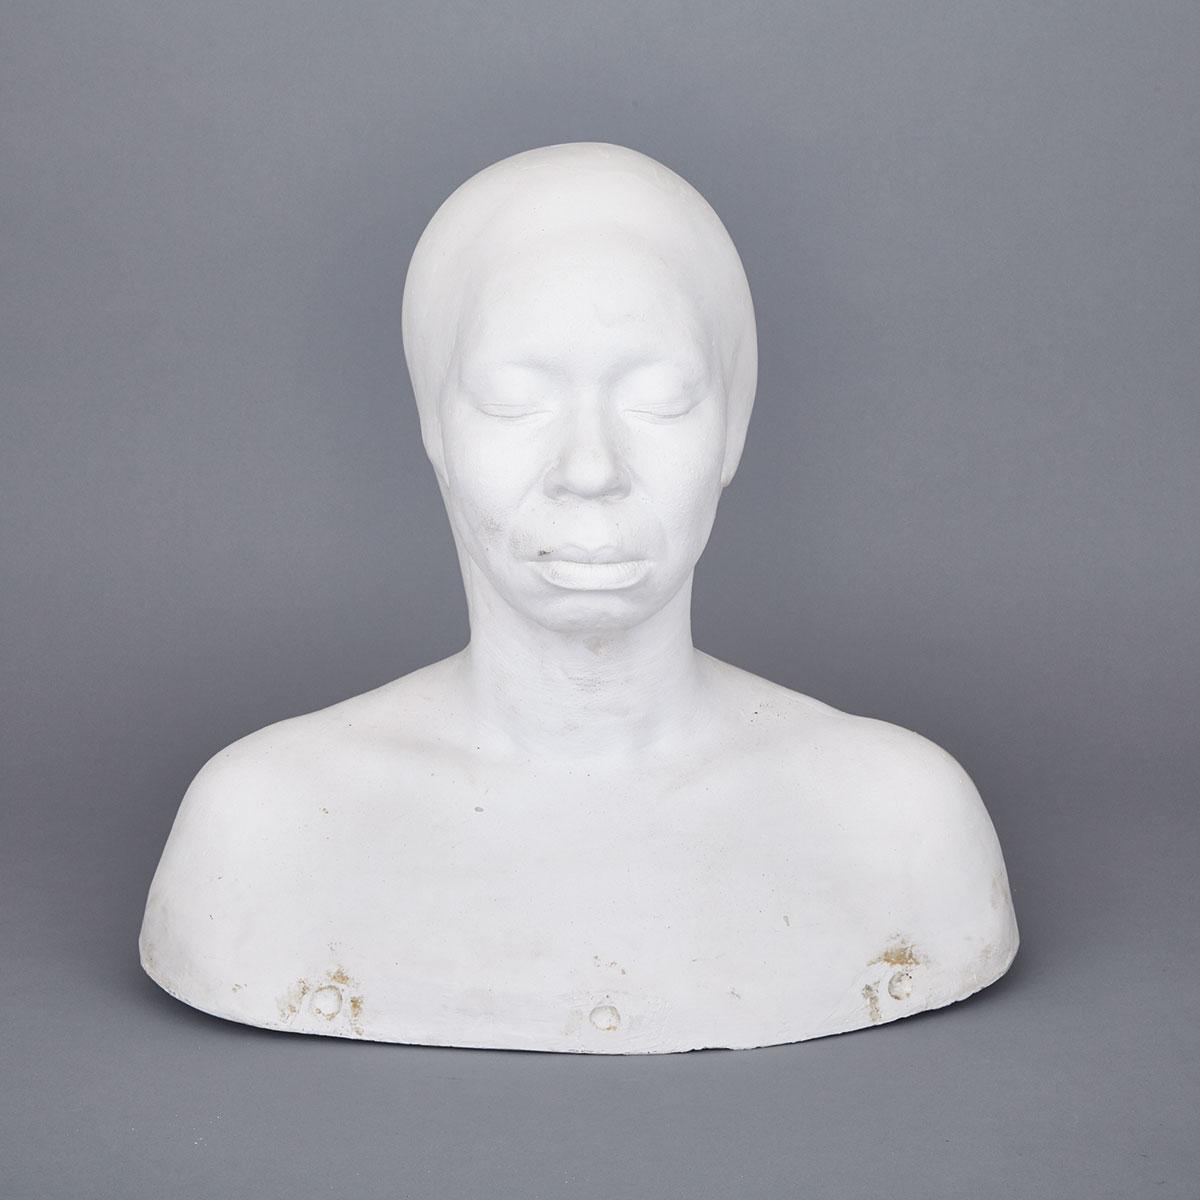 Special Make Up Effects Plaster Life Bust of Whoopi Goldberg